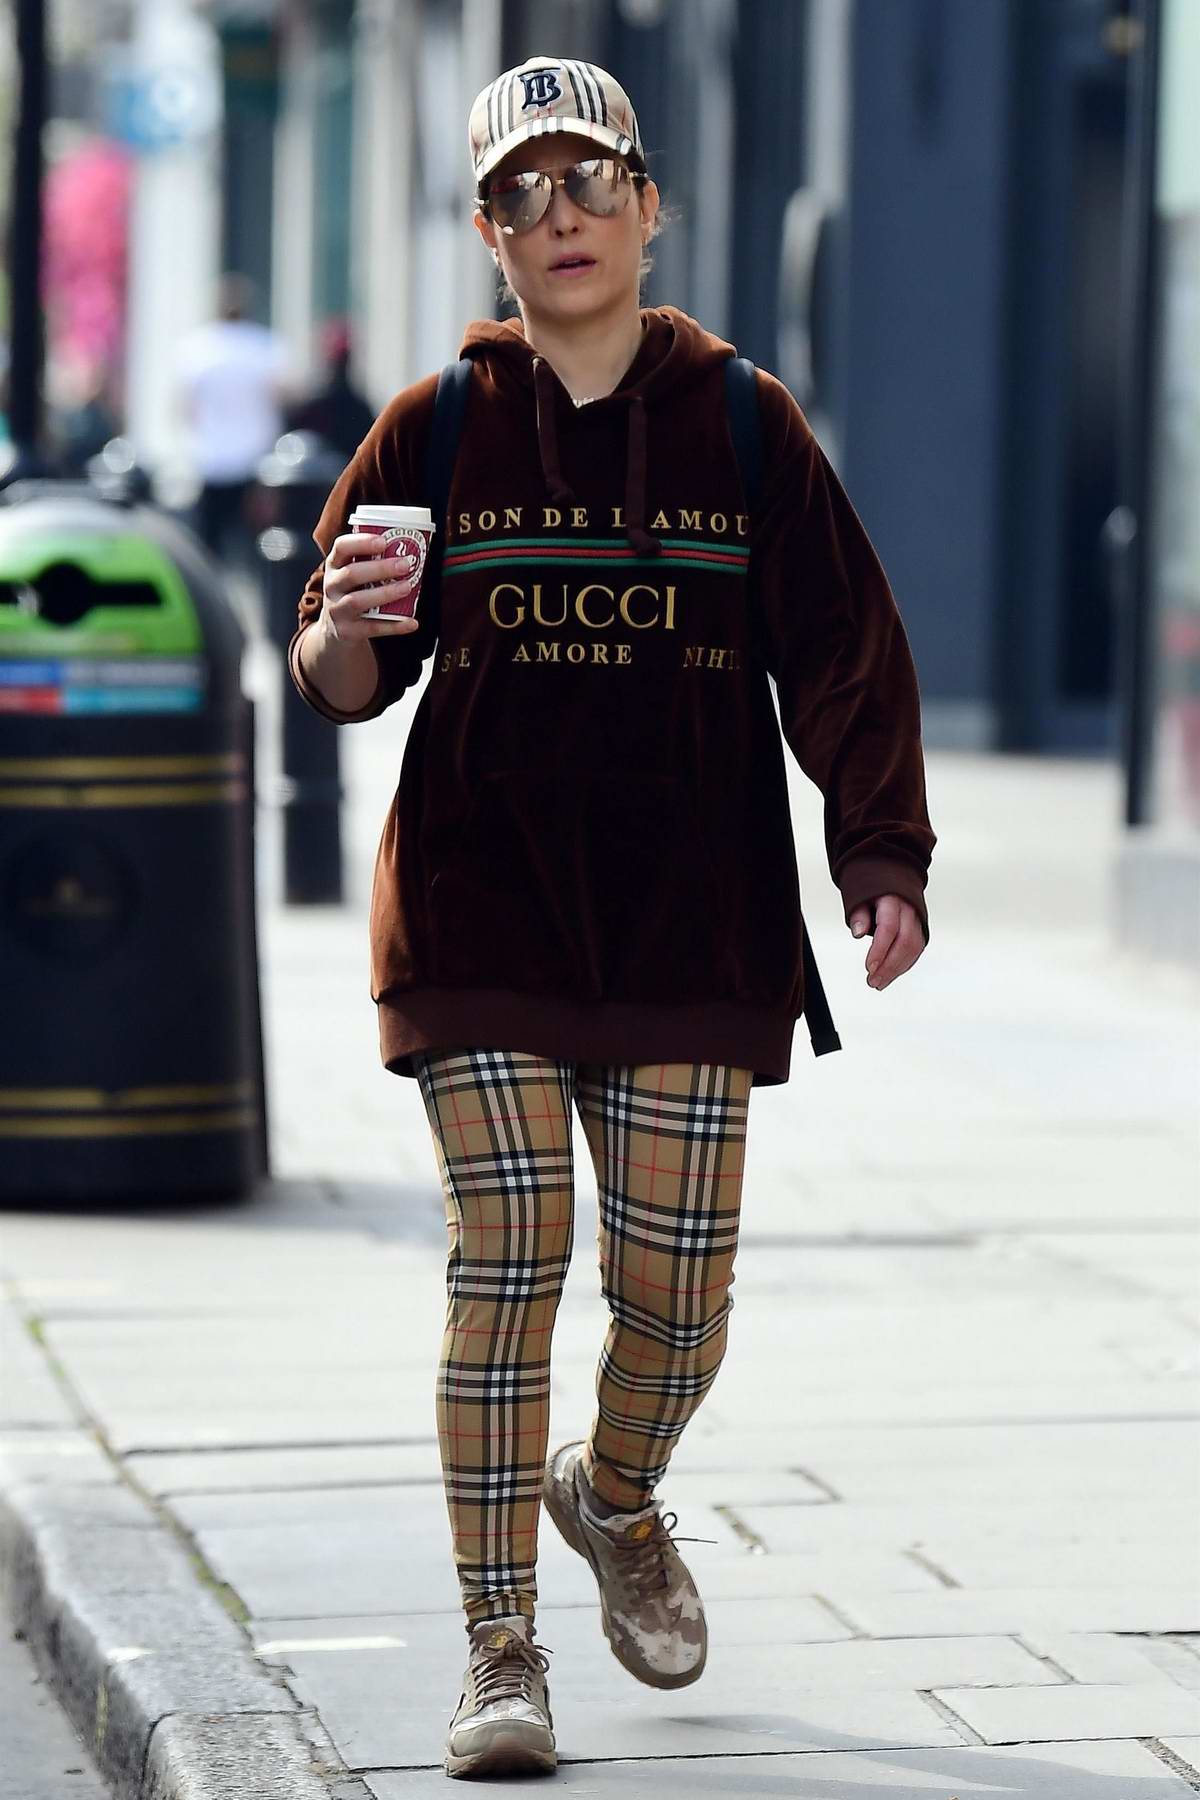 noomi rapace sports gucci hoodie and burberry check leggings while